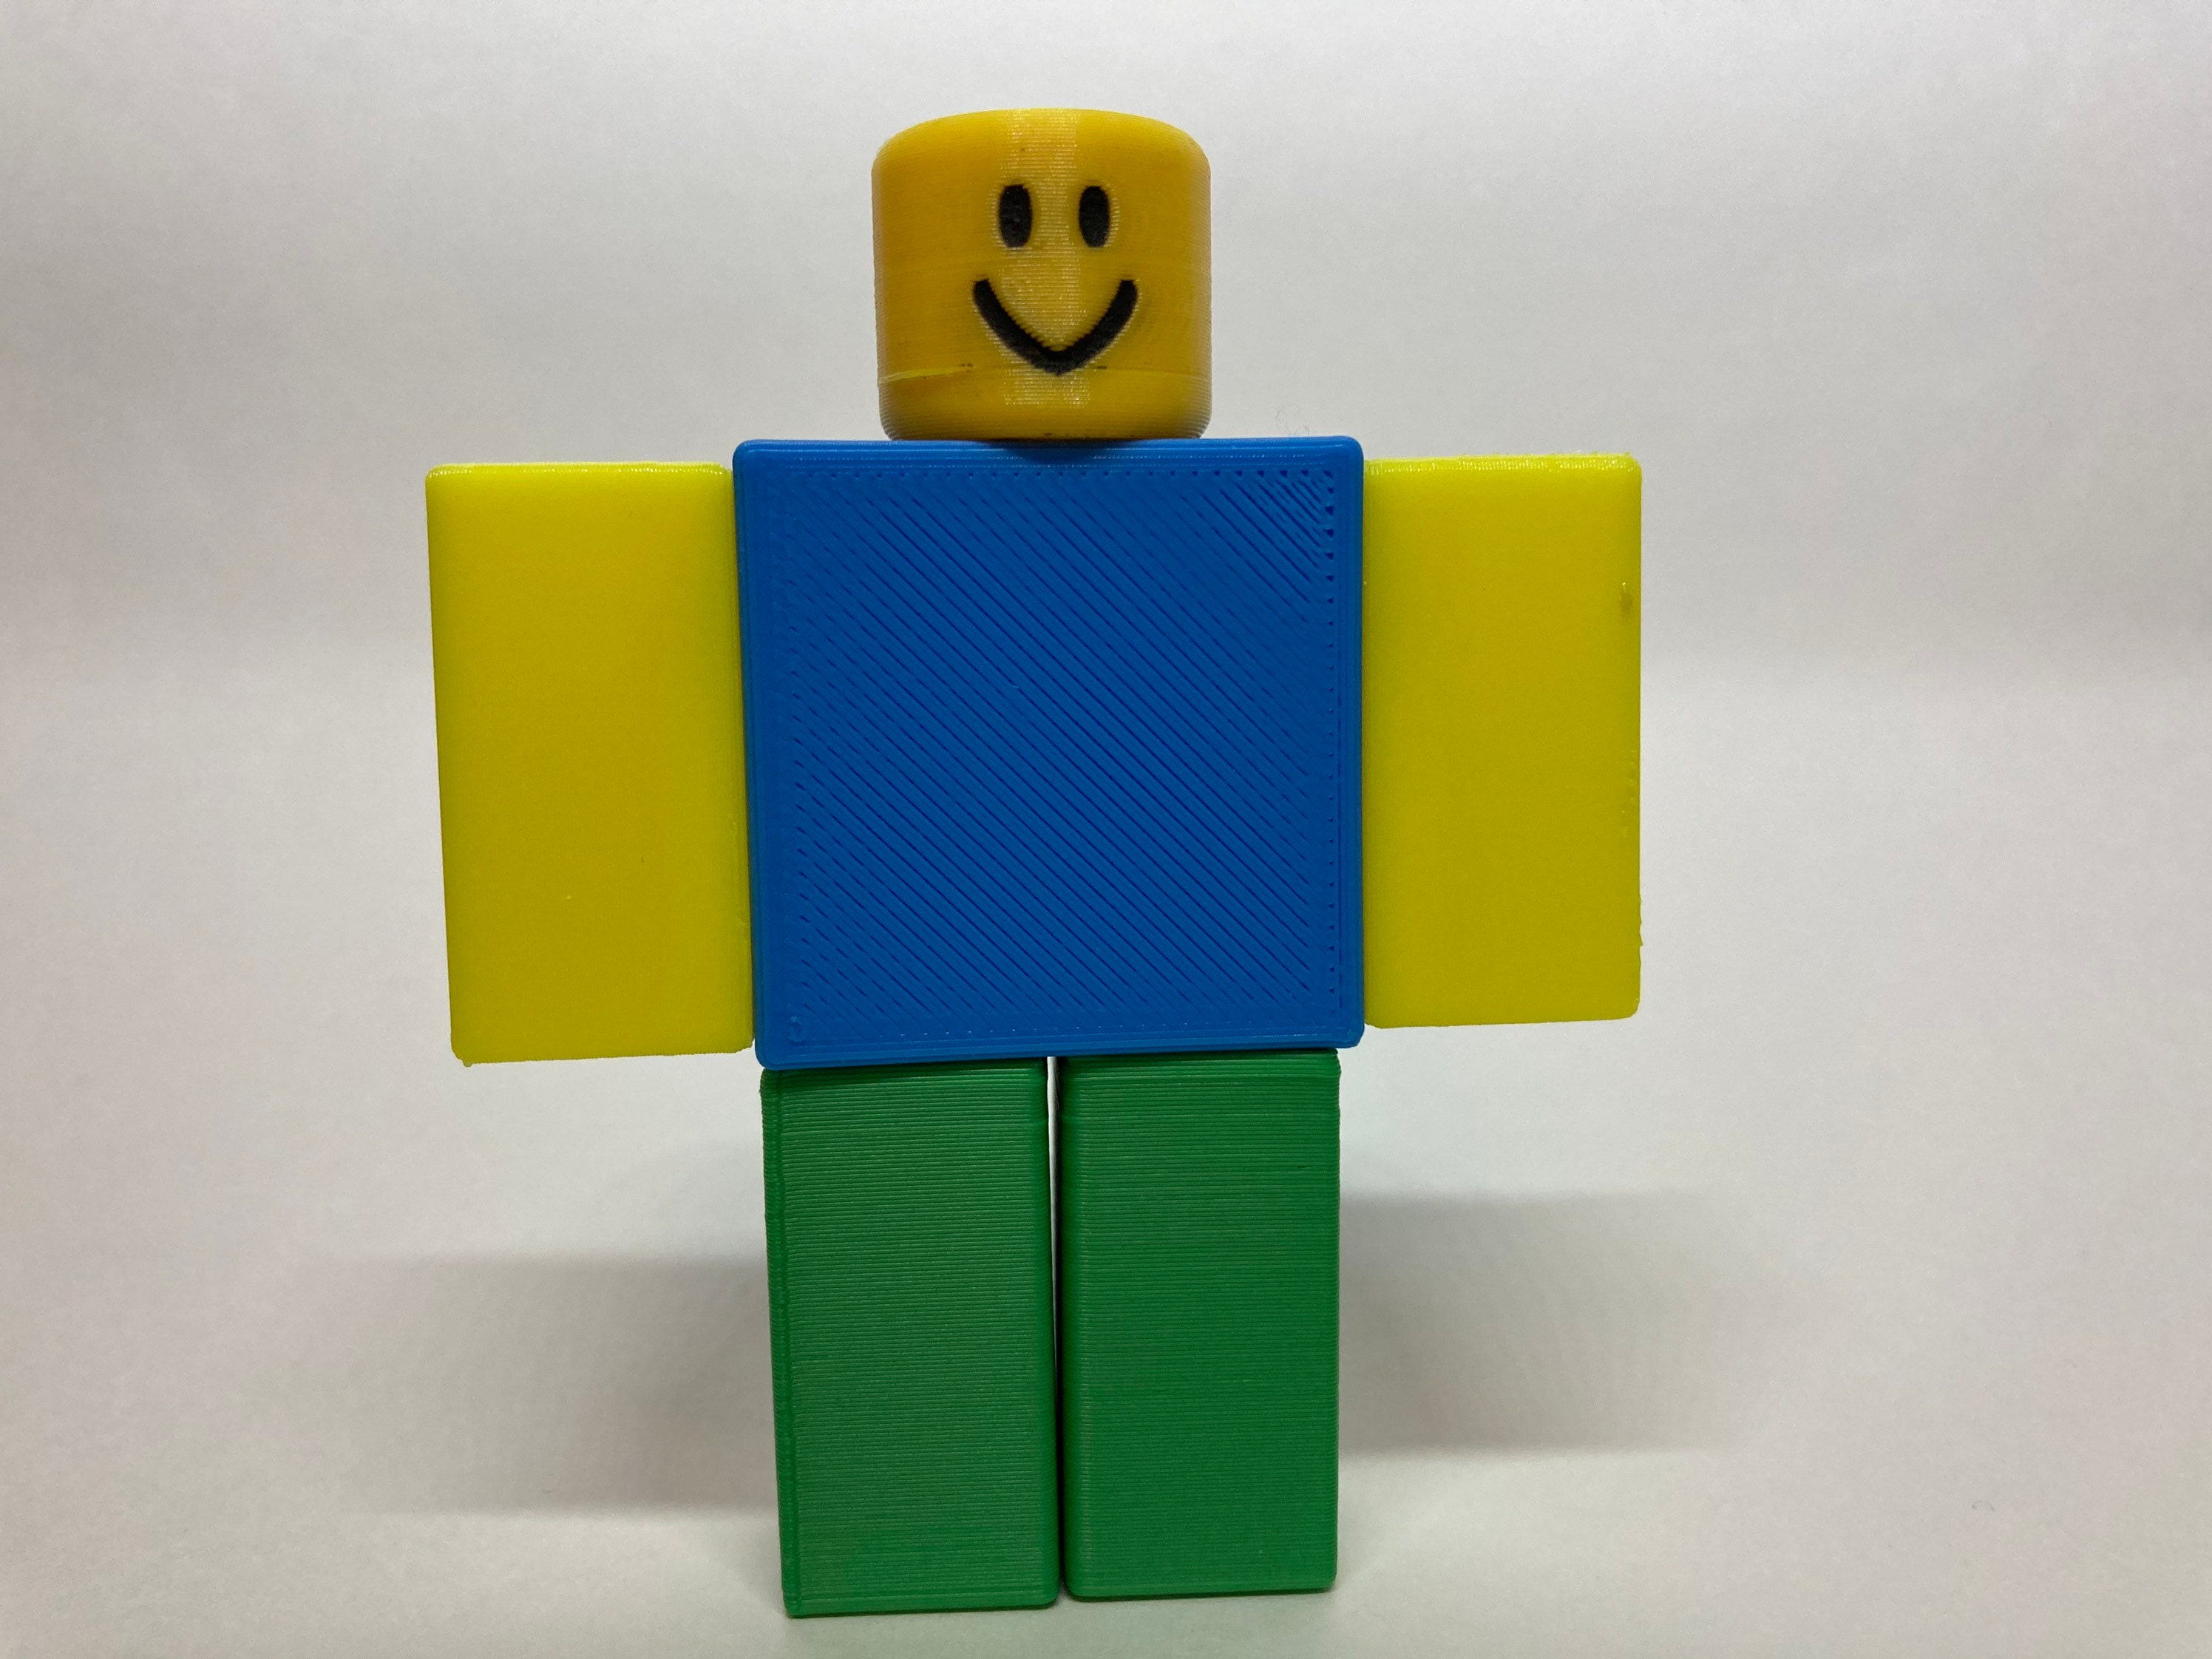 Roblox Noob 3d Printed Toy Etsy - 3d printed roblox character